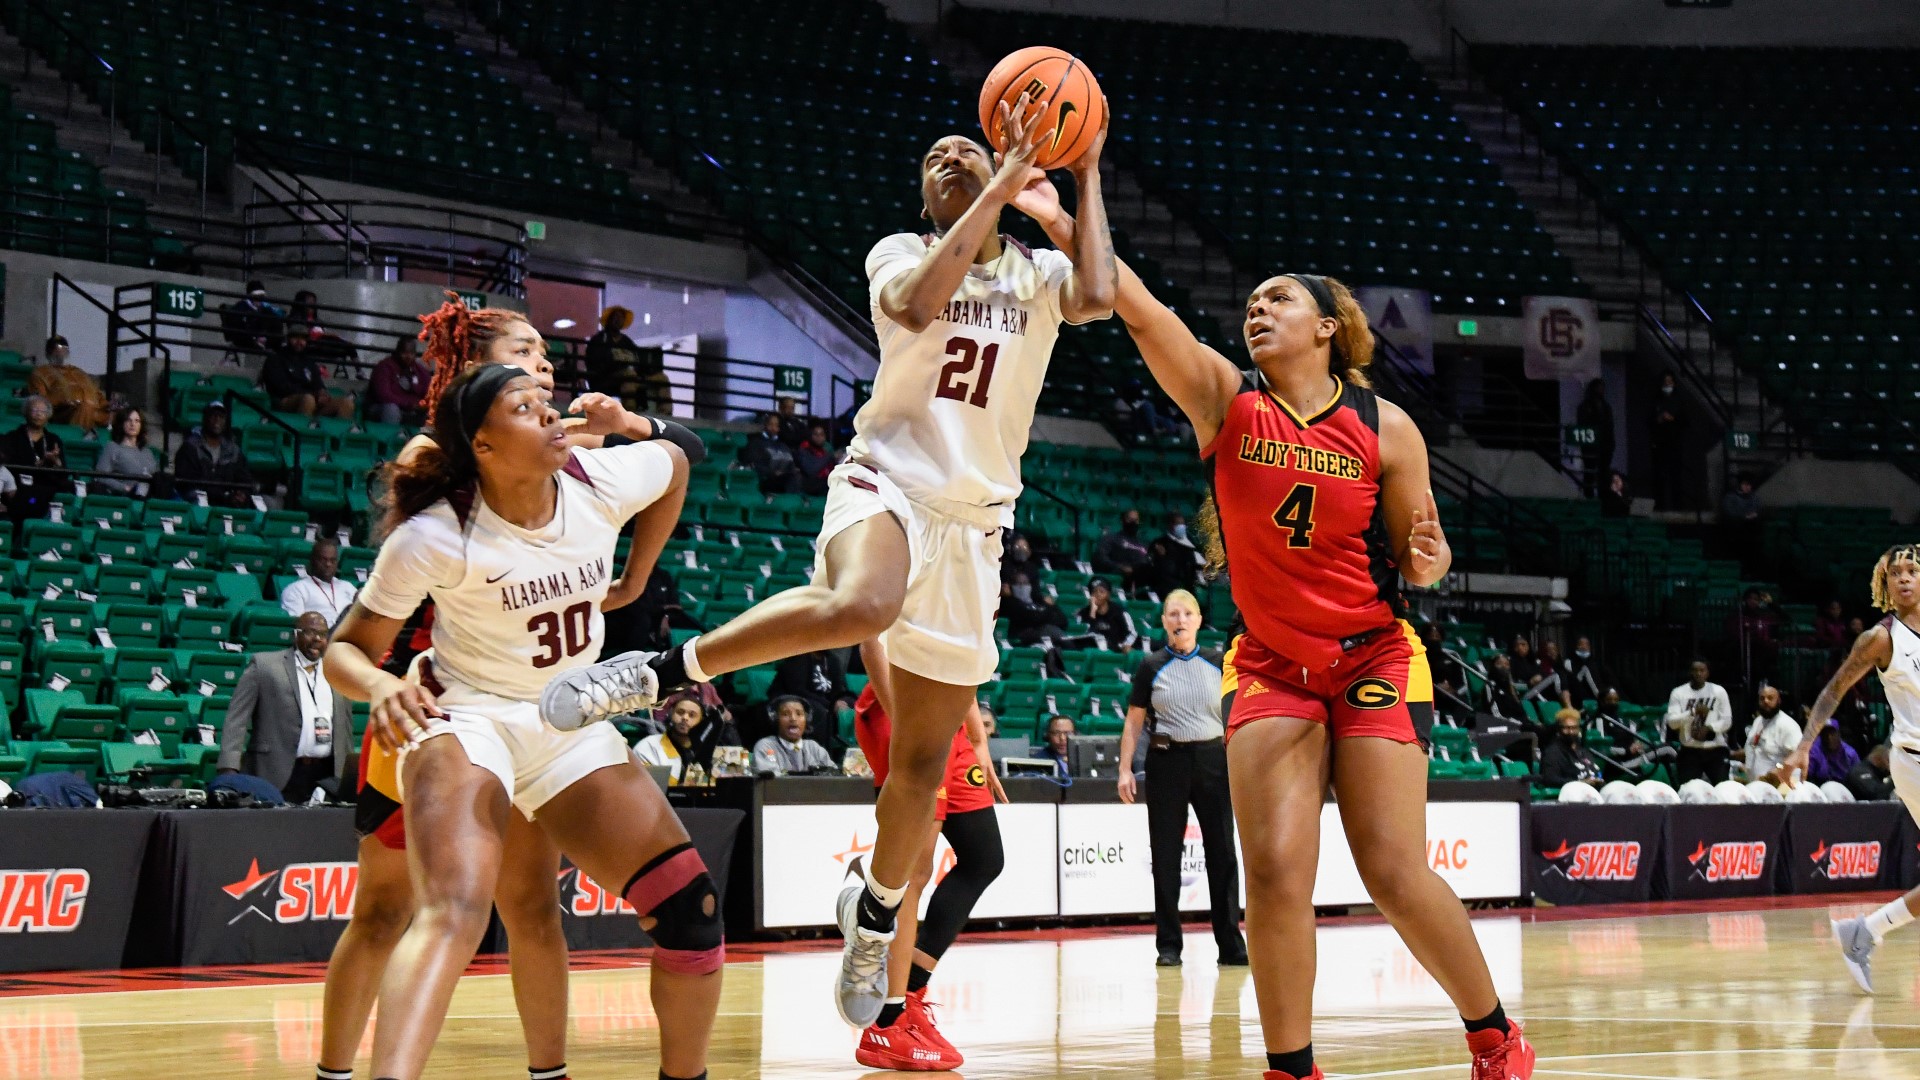 Dariauna Lewis scored a season-high 32 points and hauled in 10 boards as Alabama A&M dropped a 62-54 decision to Grambling in the SWAC Women's Tournament